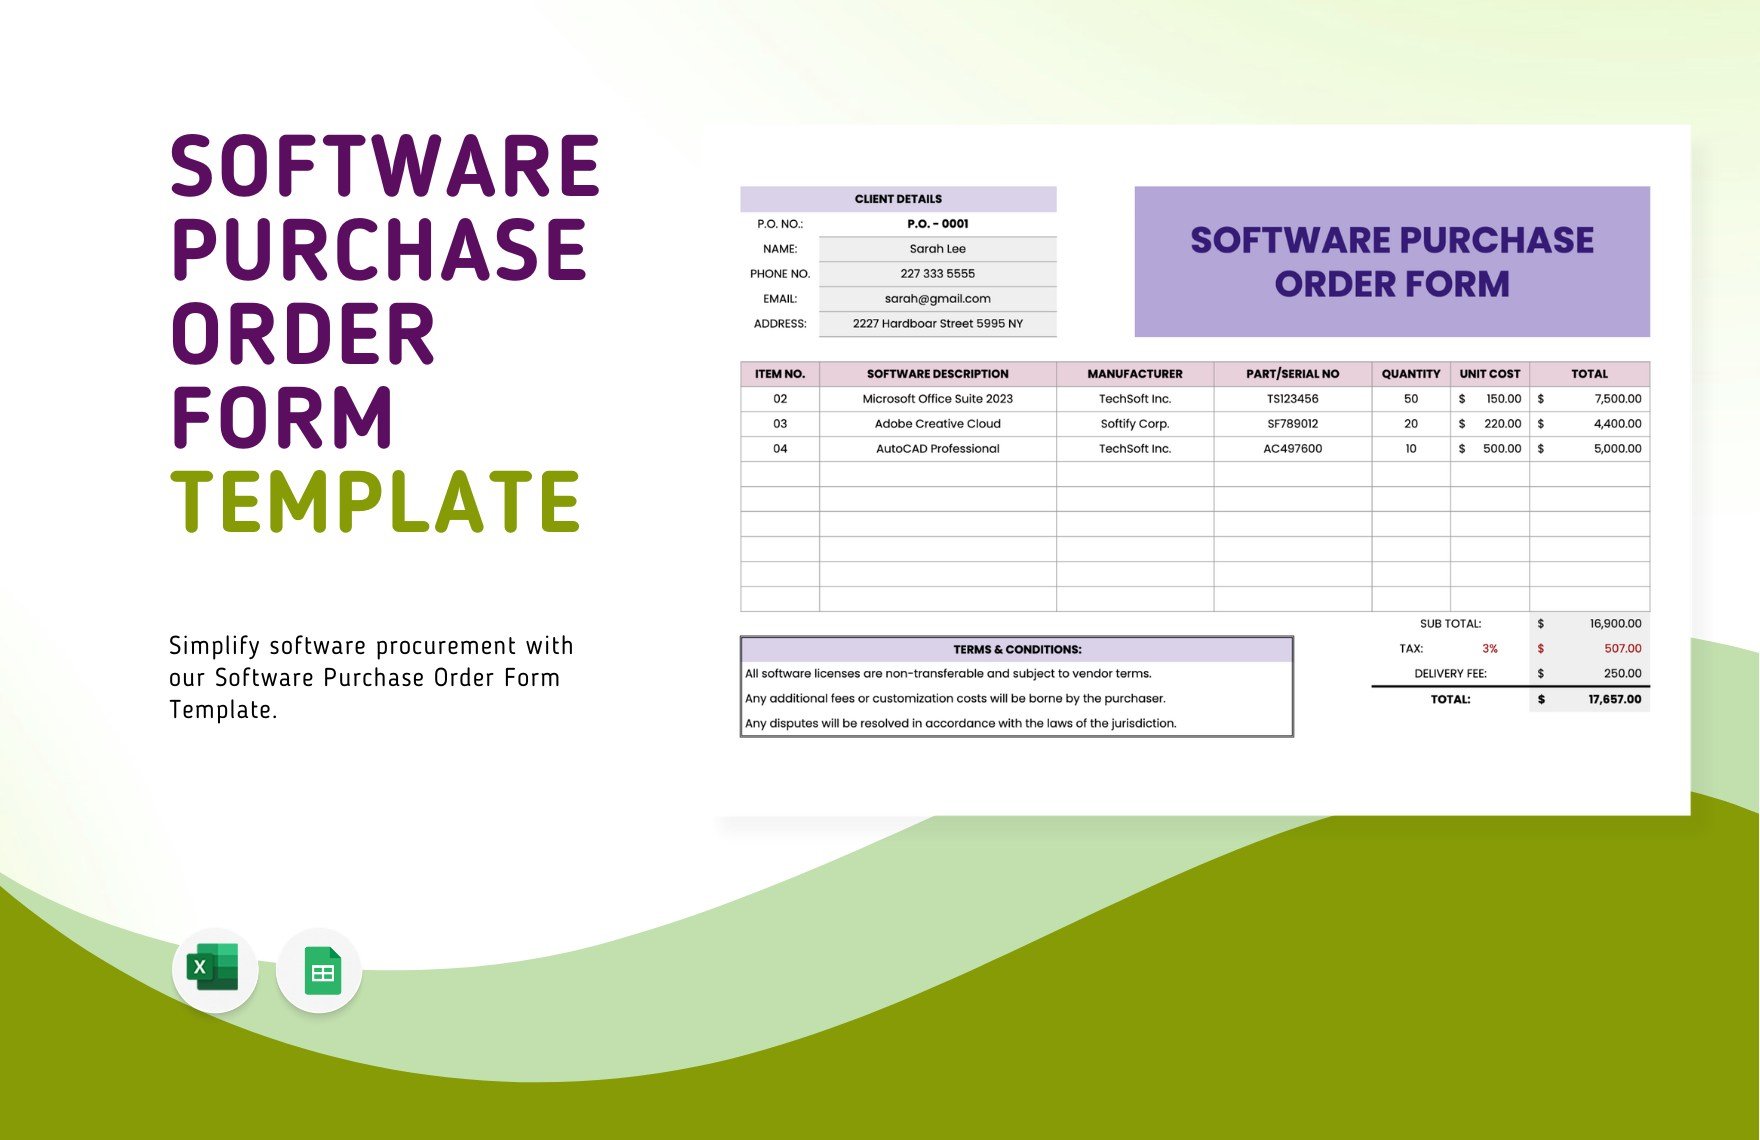 Software Purchase Order Form Template in Excel, Google Sheets